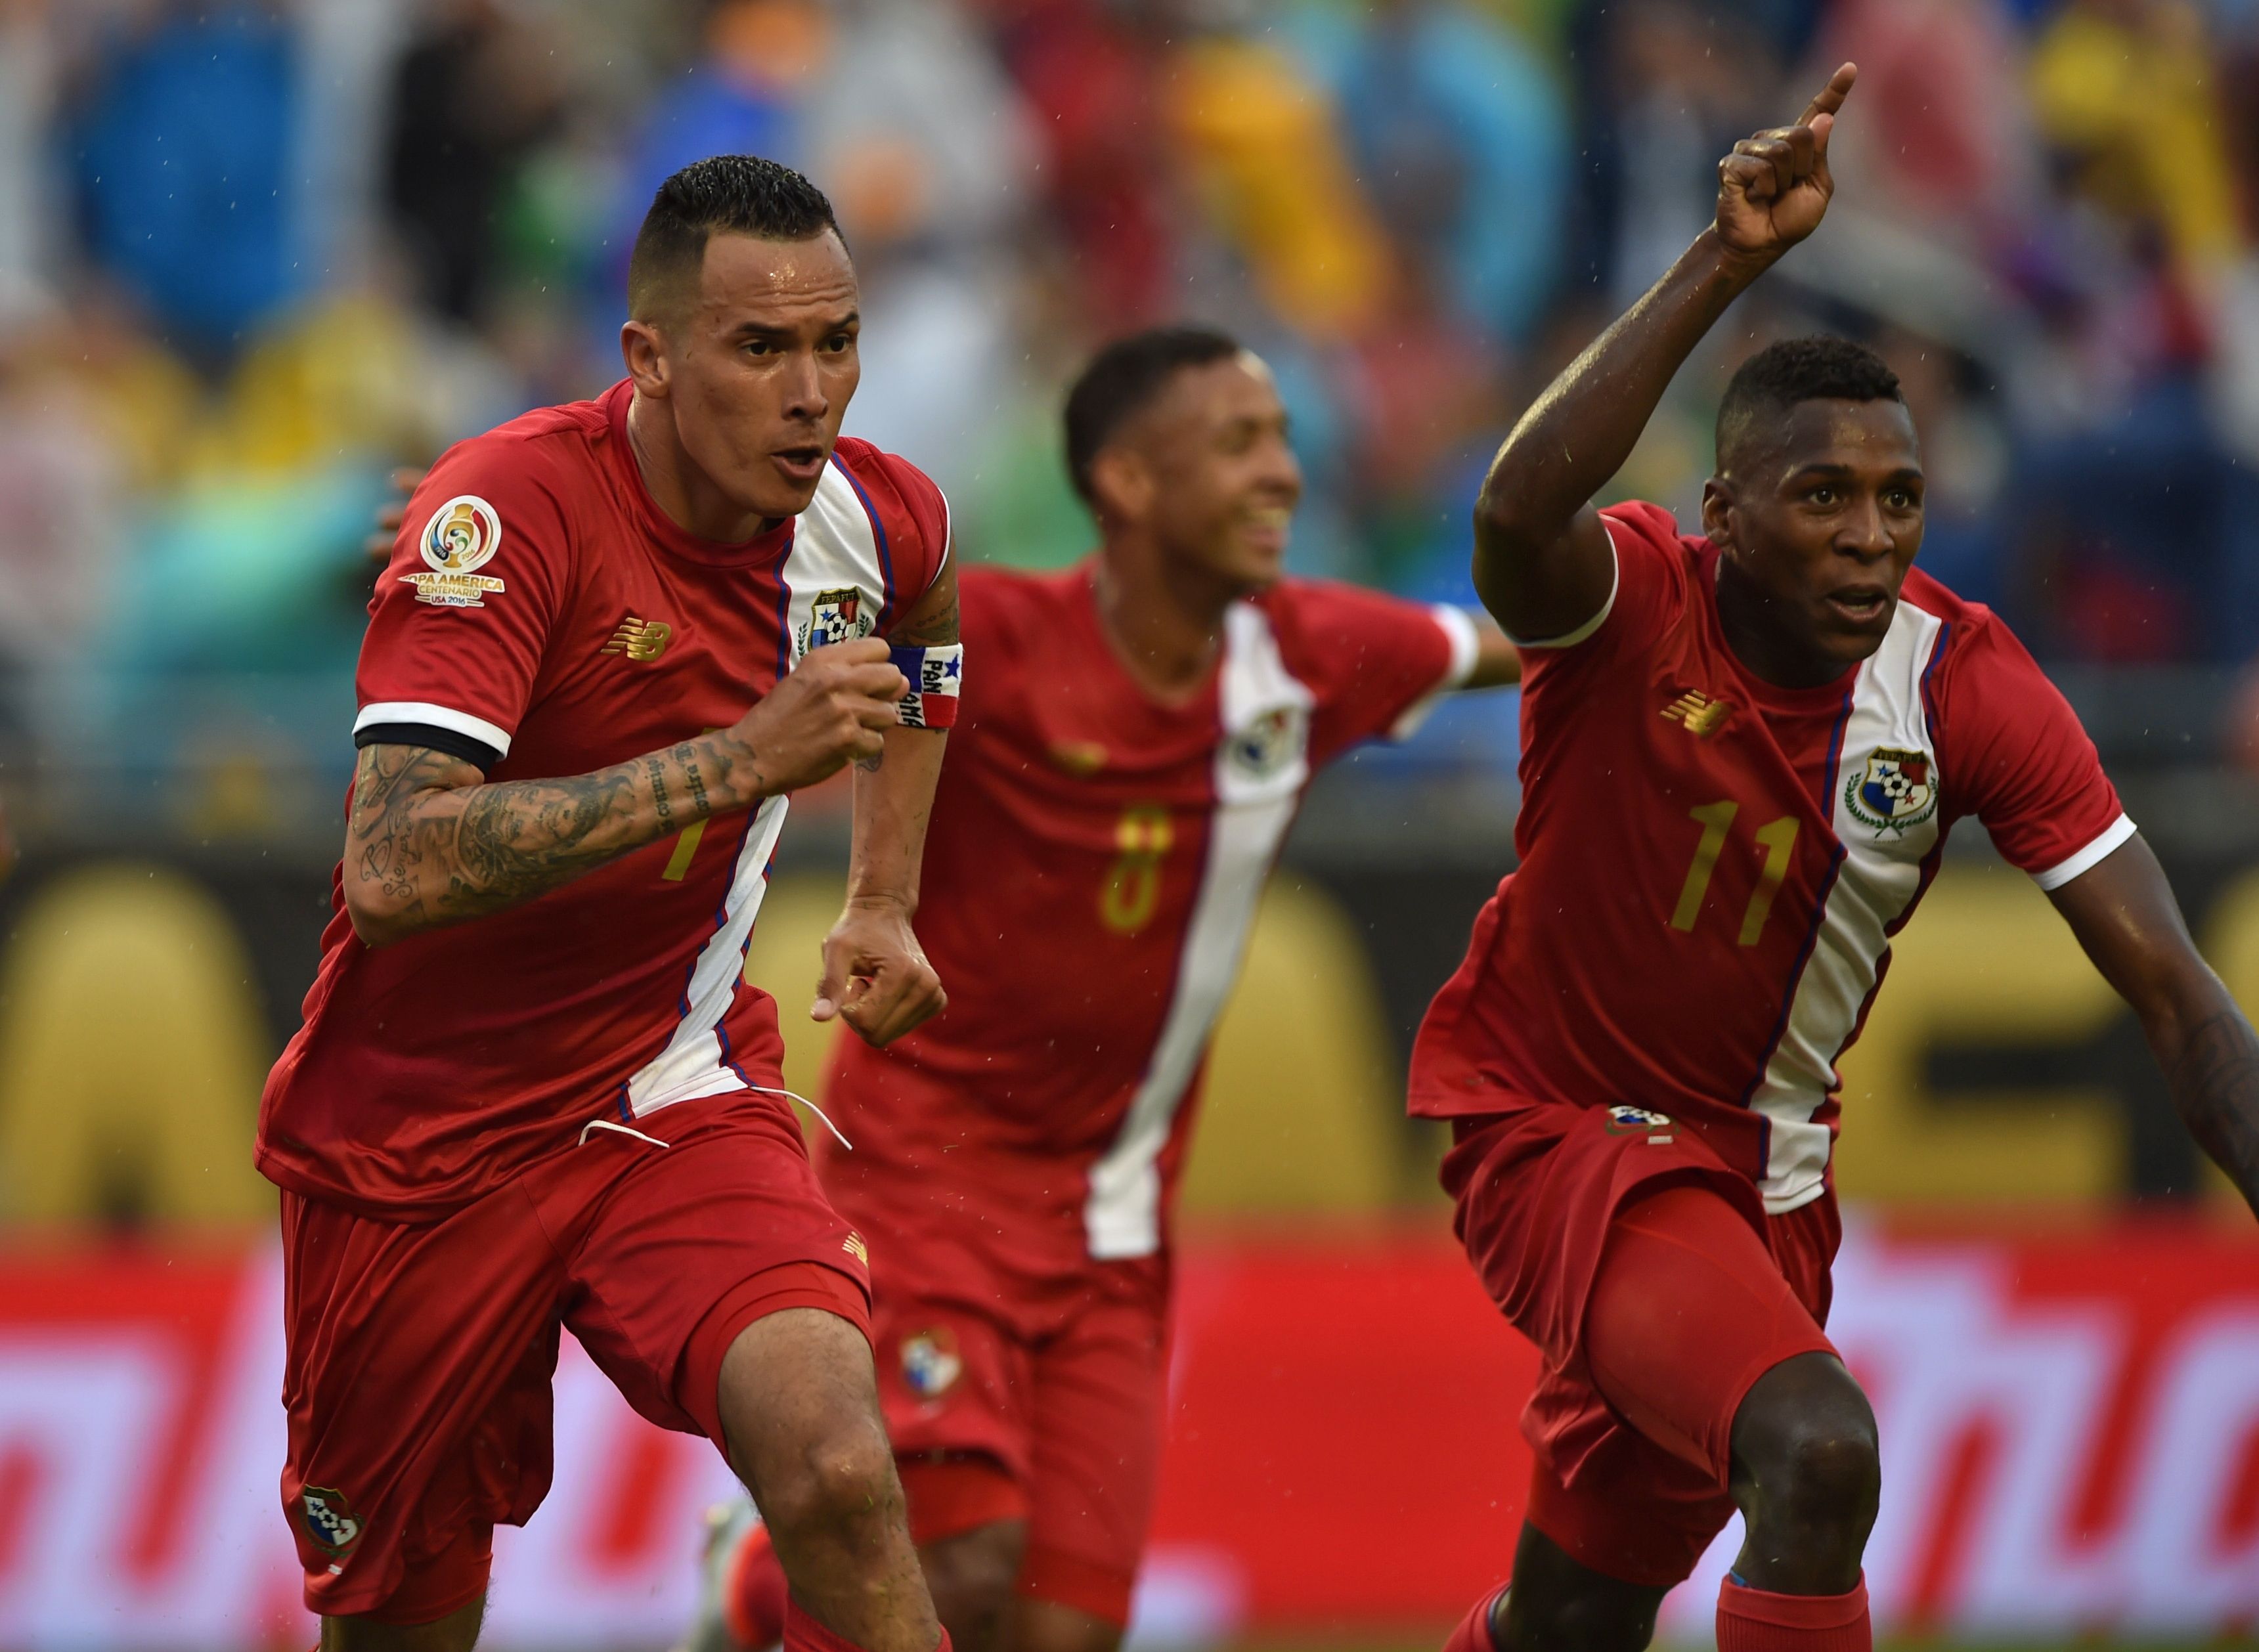 Argentina-Panama Live Stream How to Watch Online Heavy